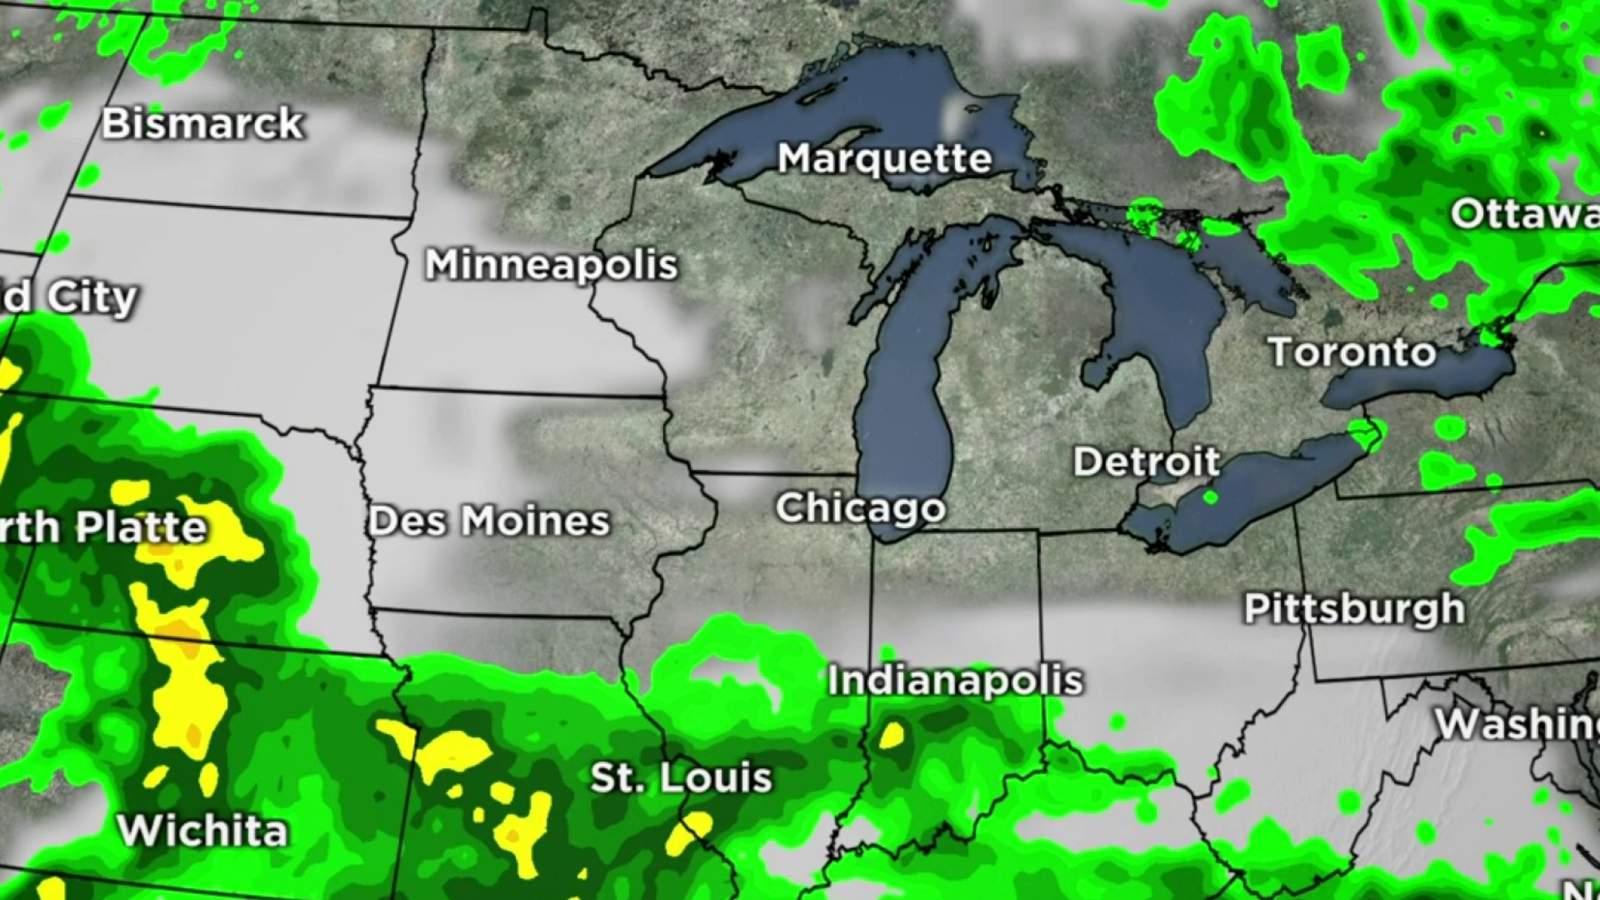 Metro Detroit weather forecast: Scattered showers and storms possible Monday